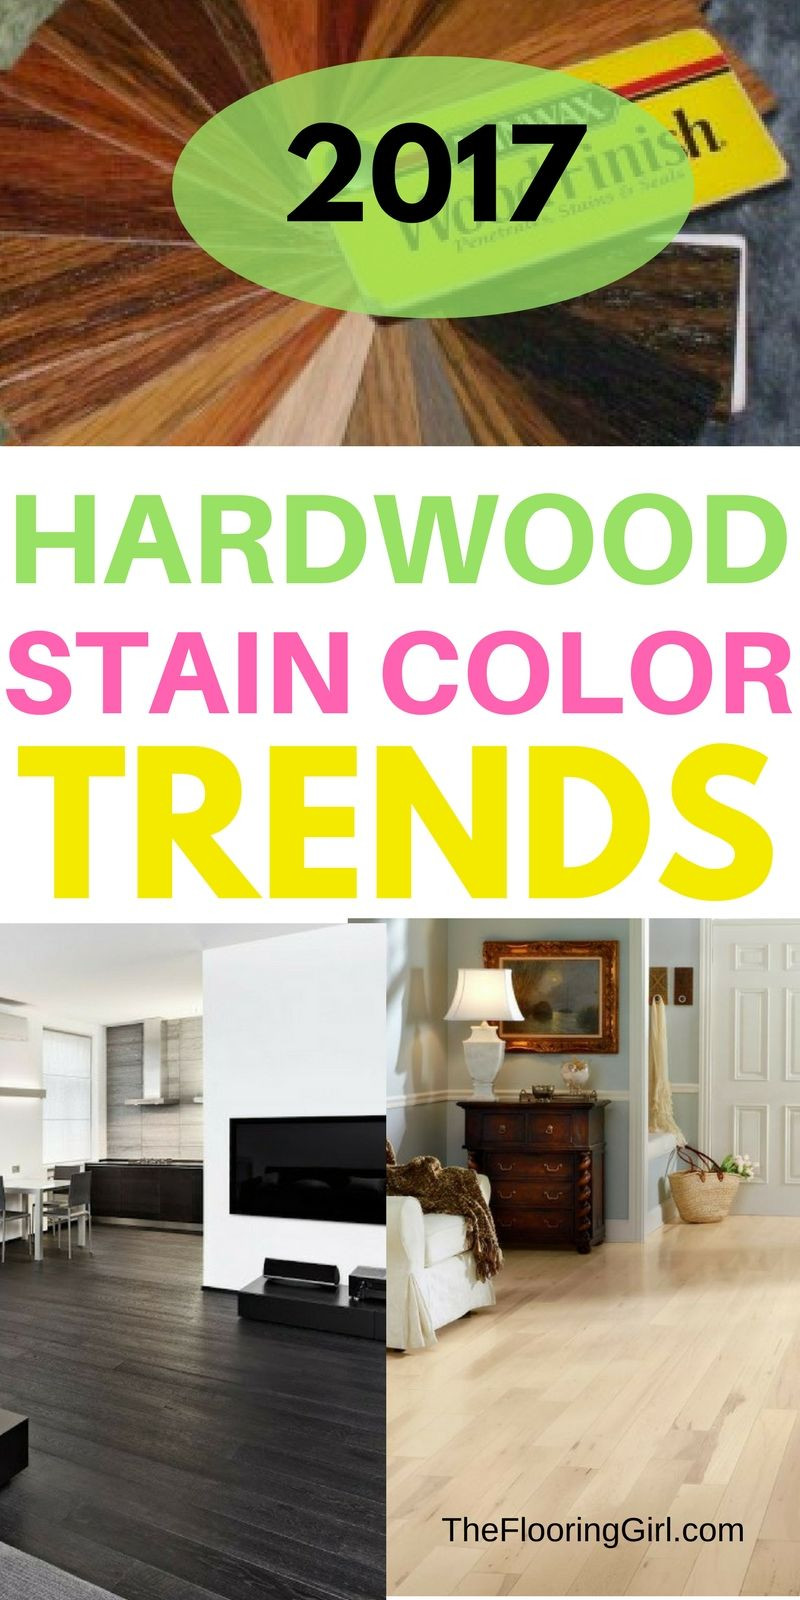 27 Cute Hardwood Floor Cleaning Service 2024 free download hardwood floor cleaning service of hardwood flooring stain color trends 2018 more from the flooring in hardwood flooring stain color trends for 2017 hardwood colors that are in style thefloo